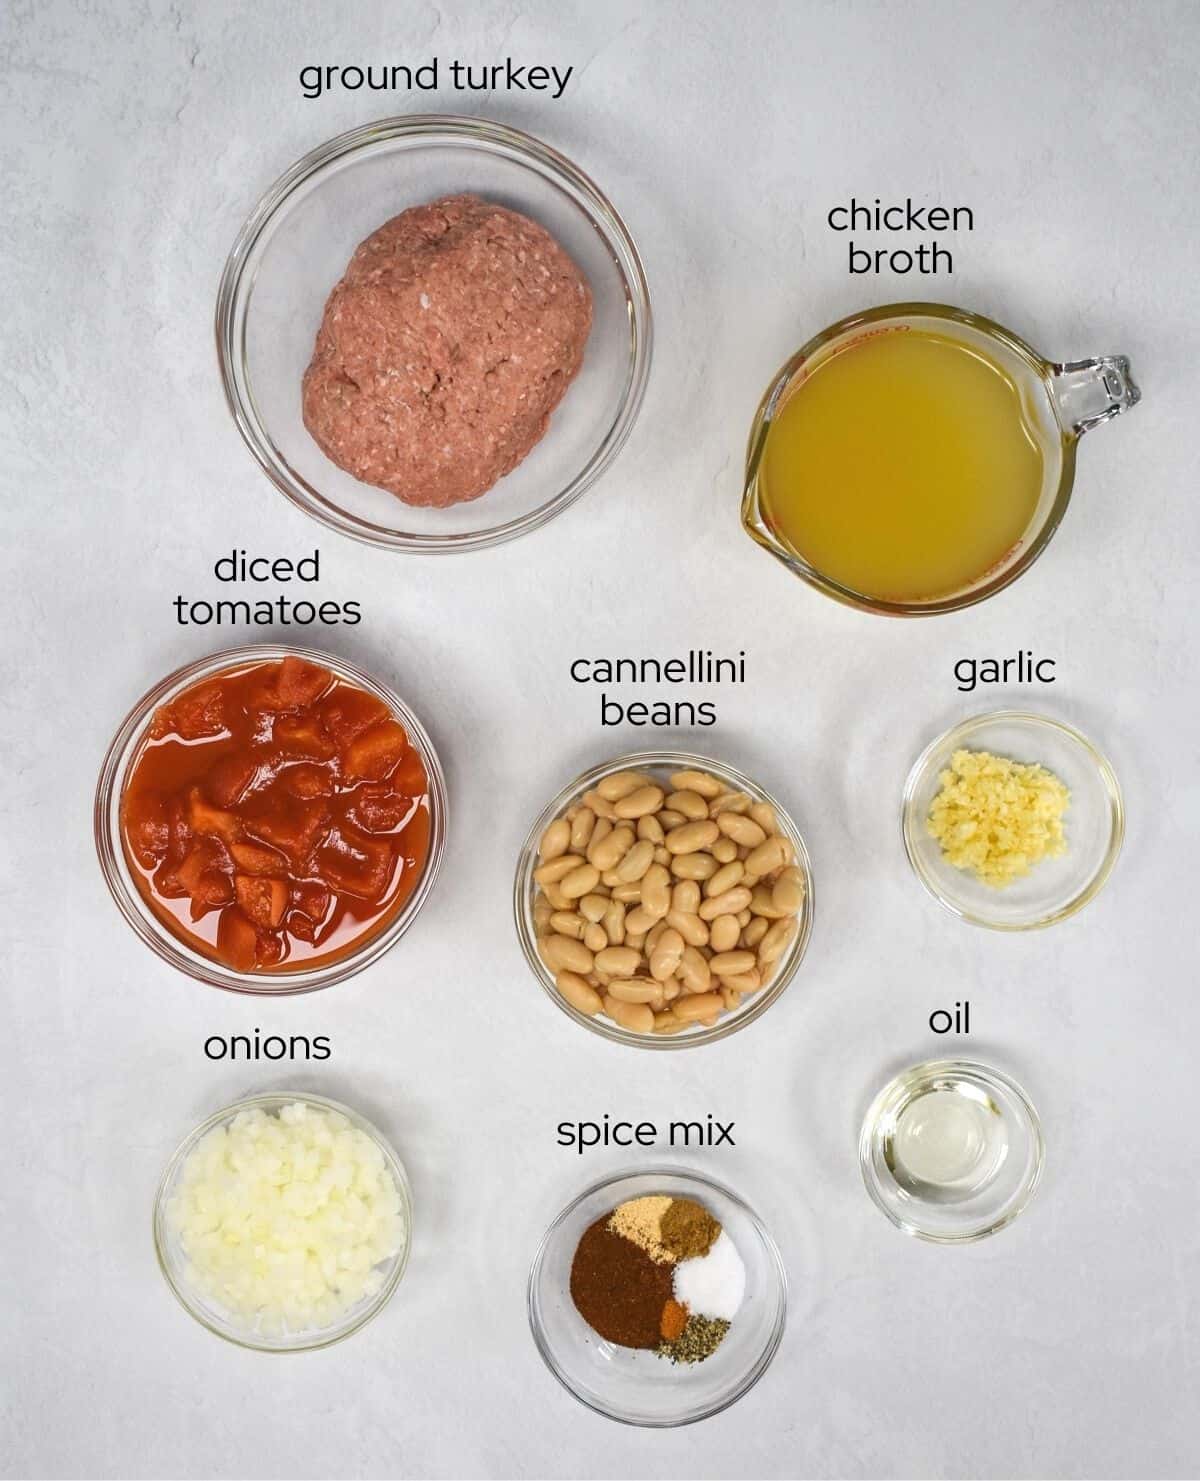 An image of the ingredients for the chili arranged in glass bowls and set on a white table. Each ingredients has a small label with the name in black letters.